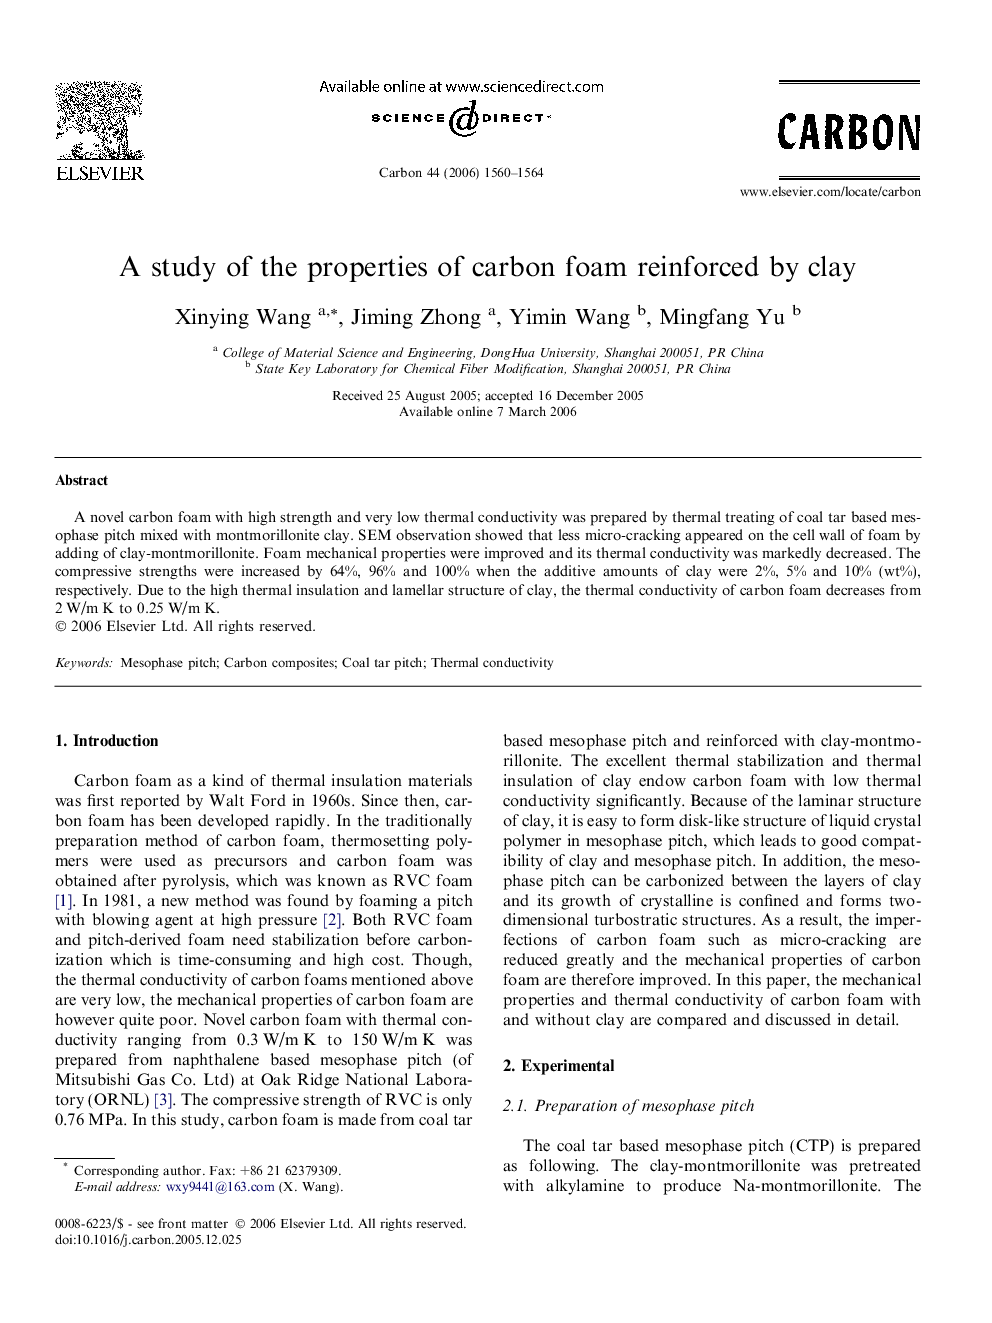 A study of the properties of carbon foam reinforced by clay